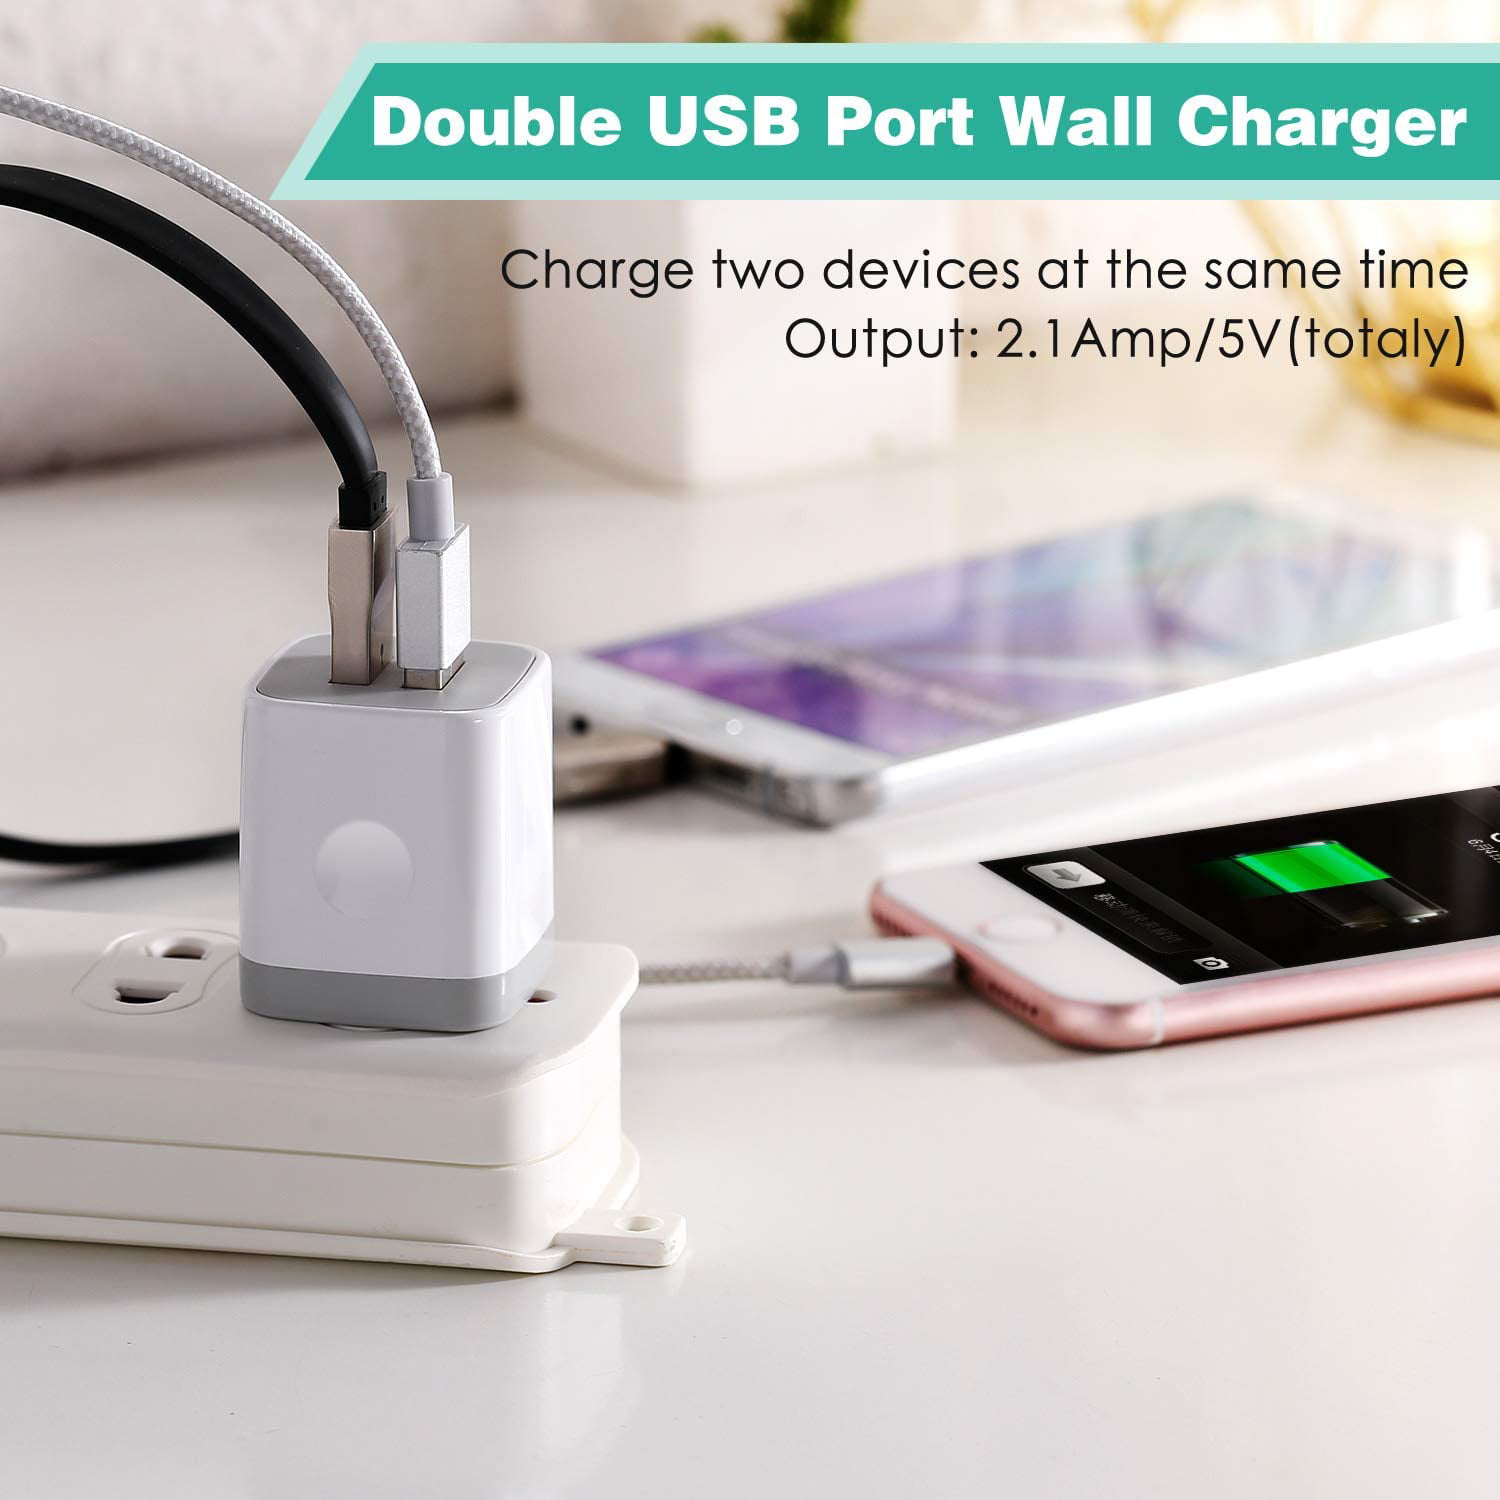 USB Wall Charger Block Android Phone iPad KENHAO 3-Pack 2.1A/5V Dual Port USB Plug Power Adapter Charger Brick Box Cube Charging Block for iPhone 13 12 11 Pro Max XS XR X 8 7 6 Plus SE Samsung 